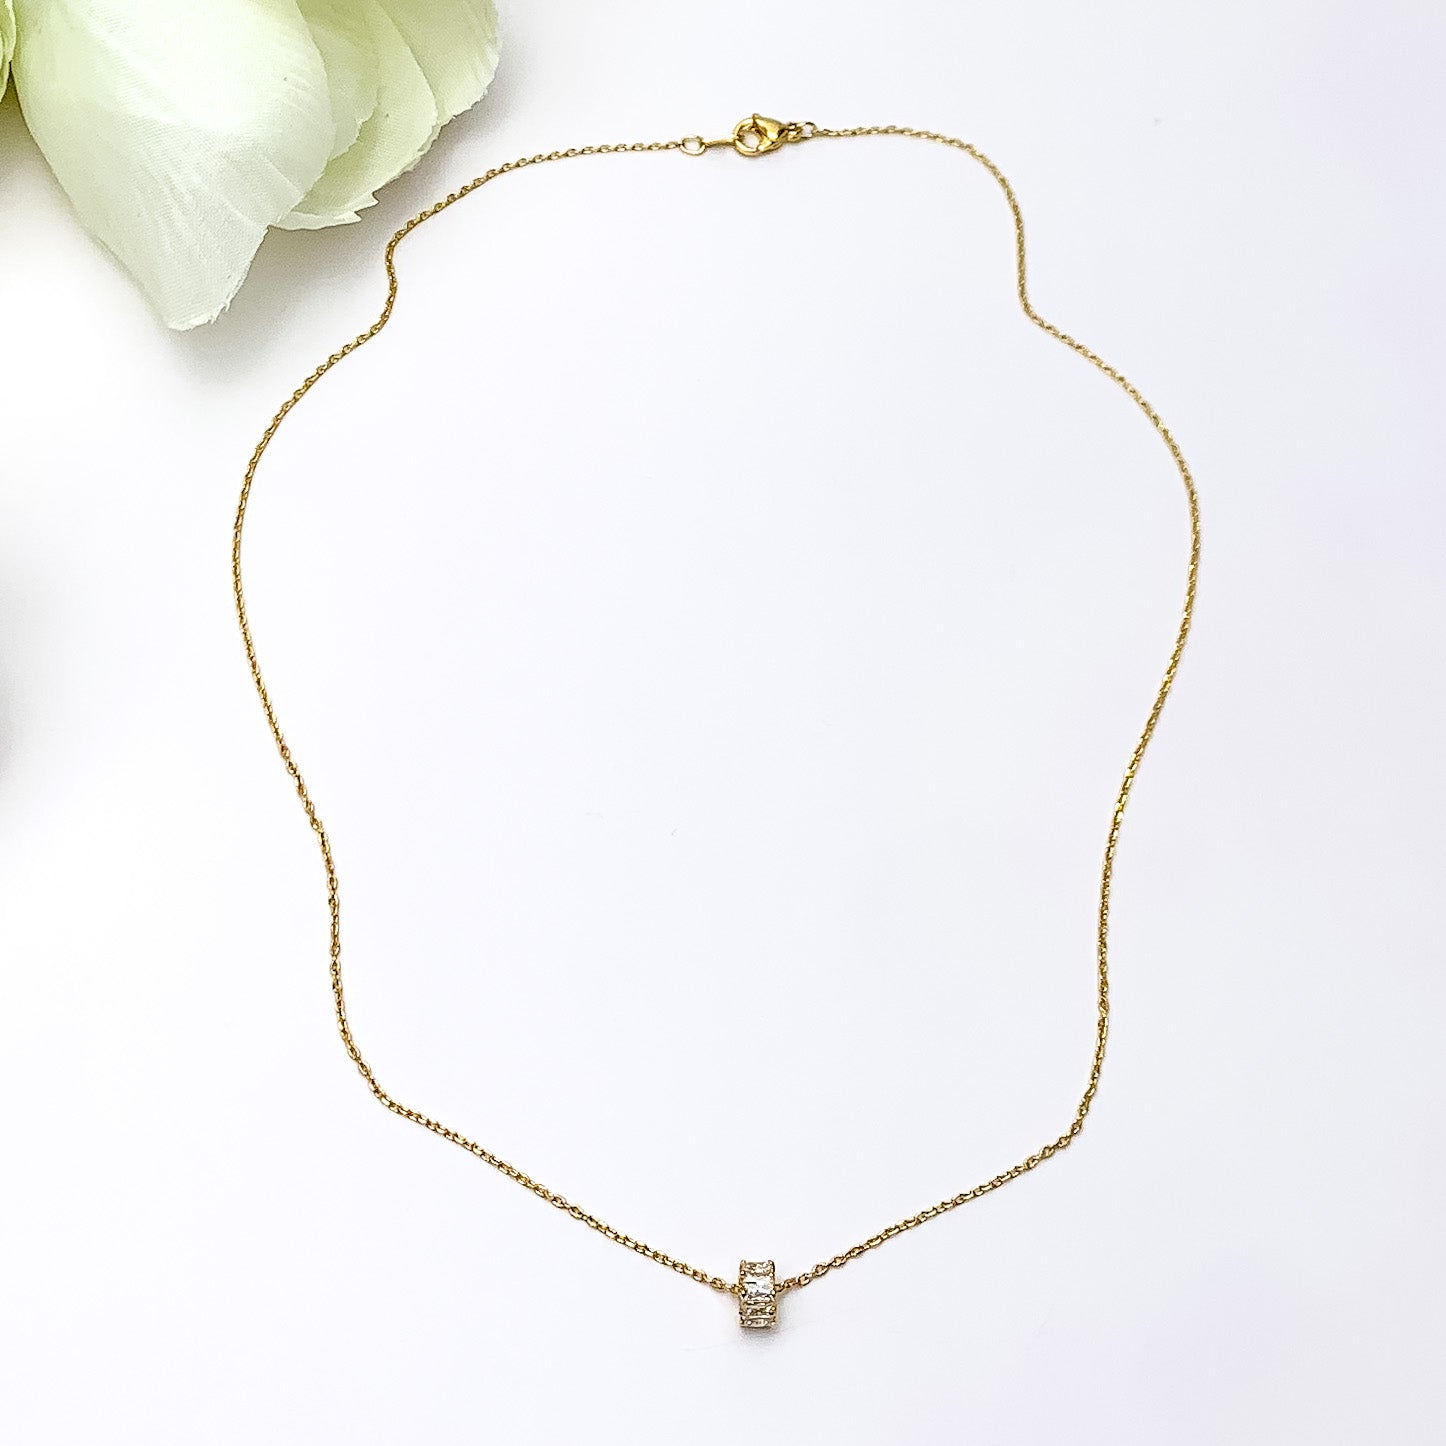 Gold Dipped Necklace With Clear Crystal Circle Charm. Pictured on a white background with a piece of wood behind the necklace.